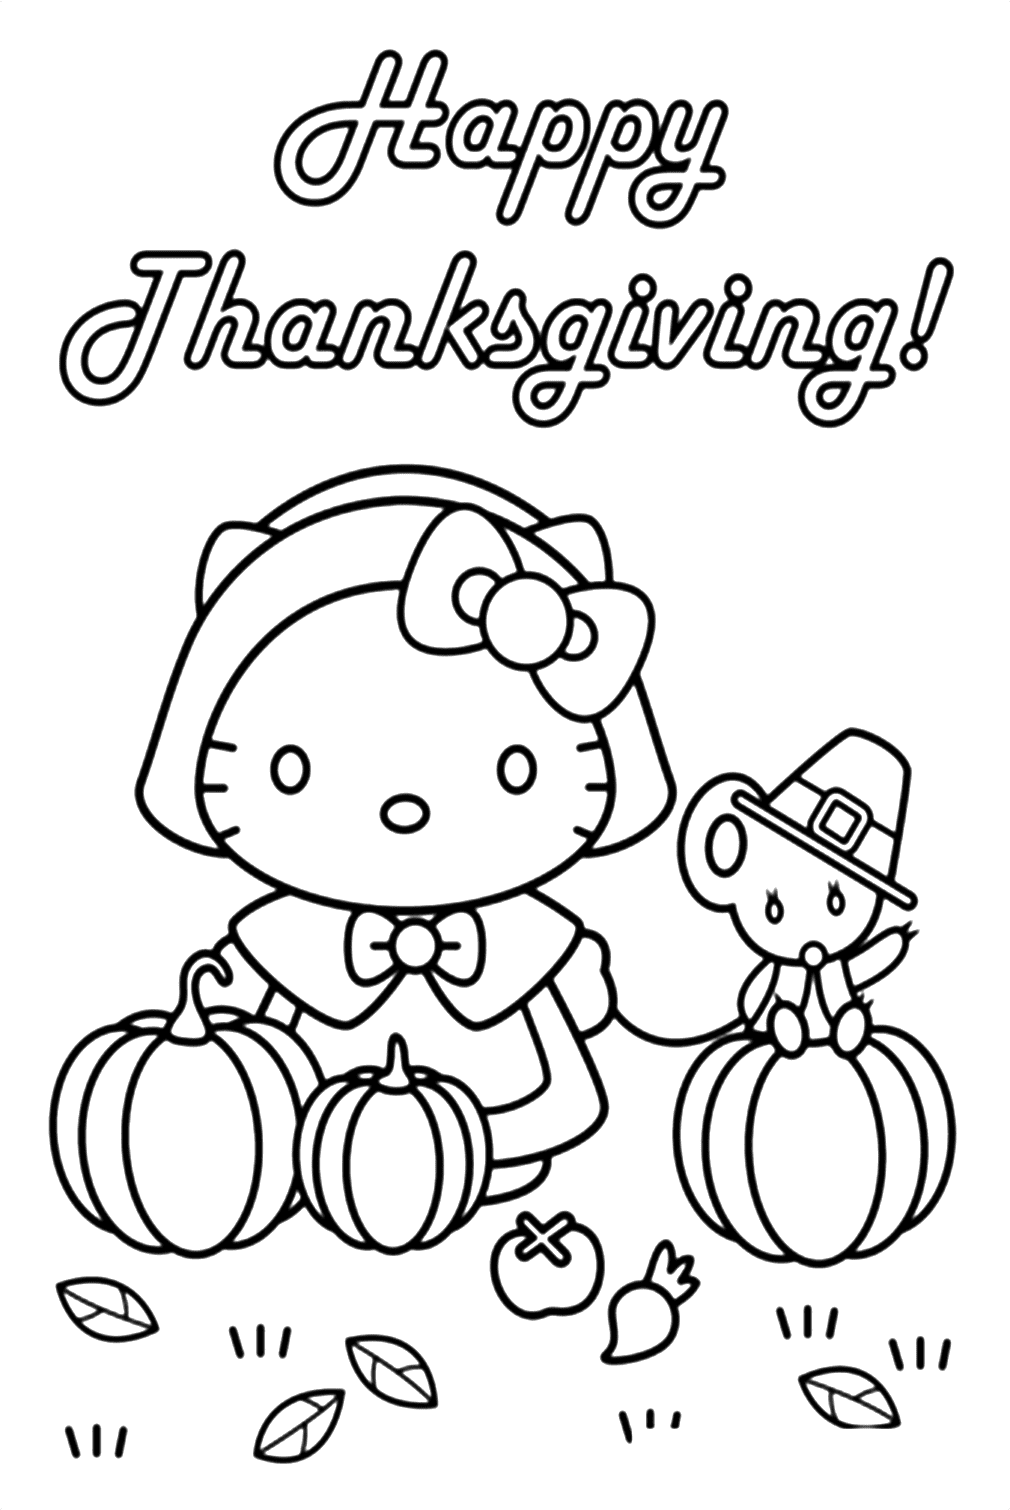 Happy Thanksgiving Hello Kitty with Teddy Bear Coloring Pages